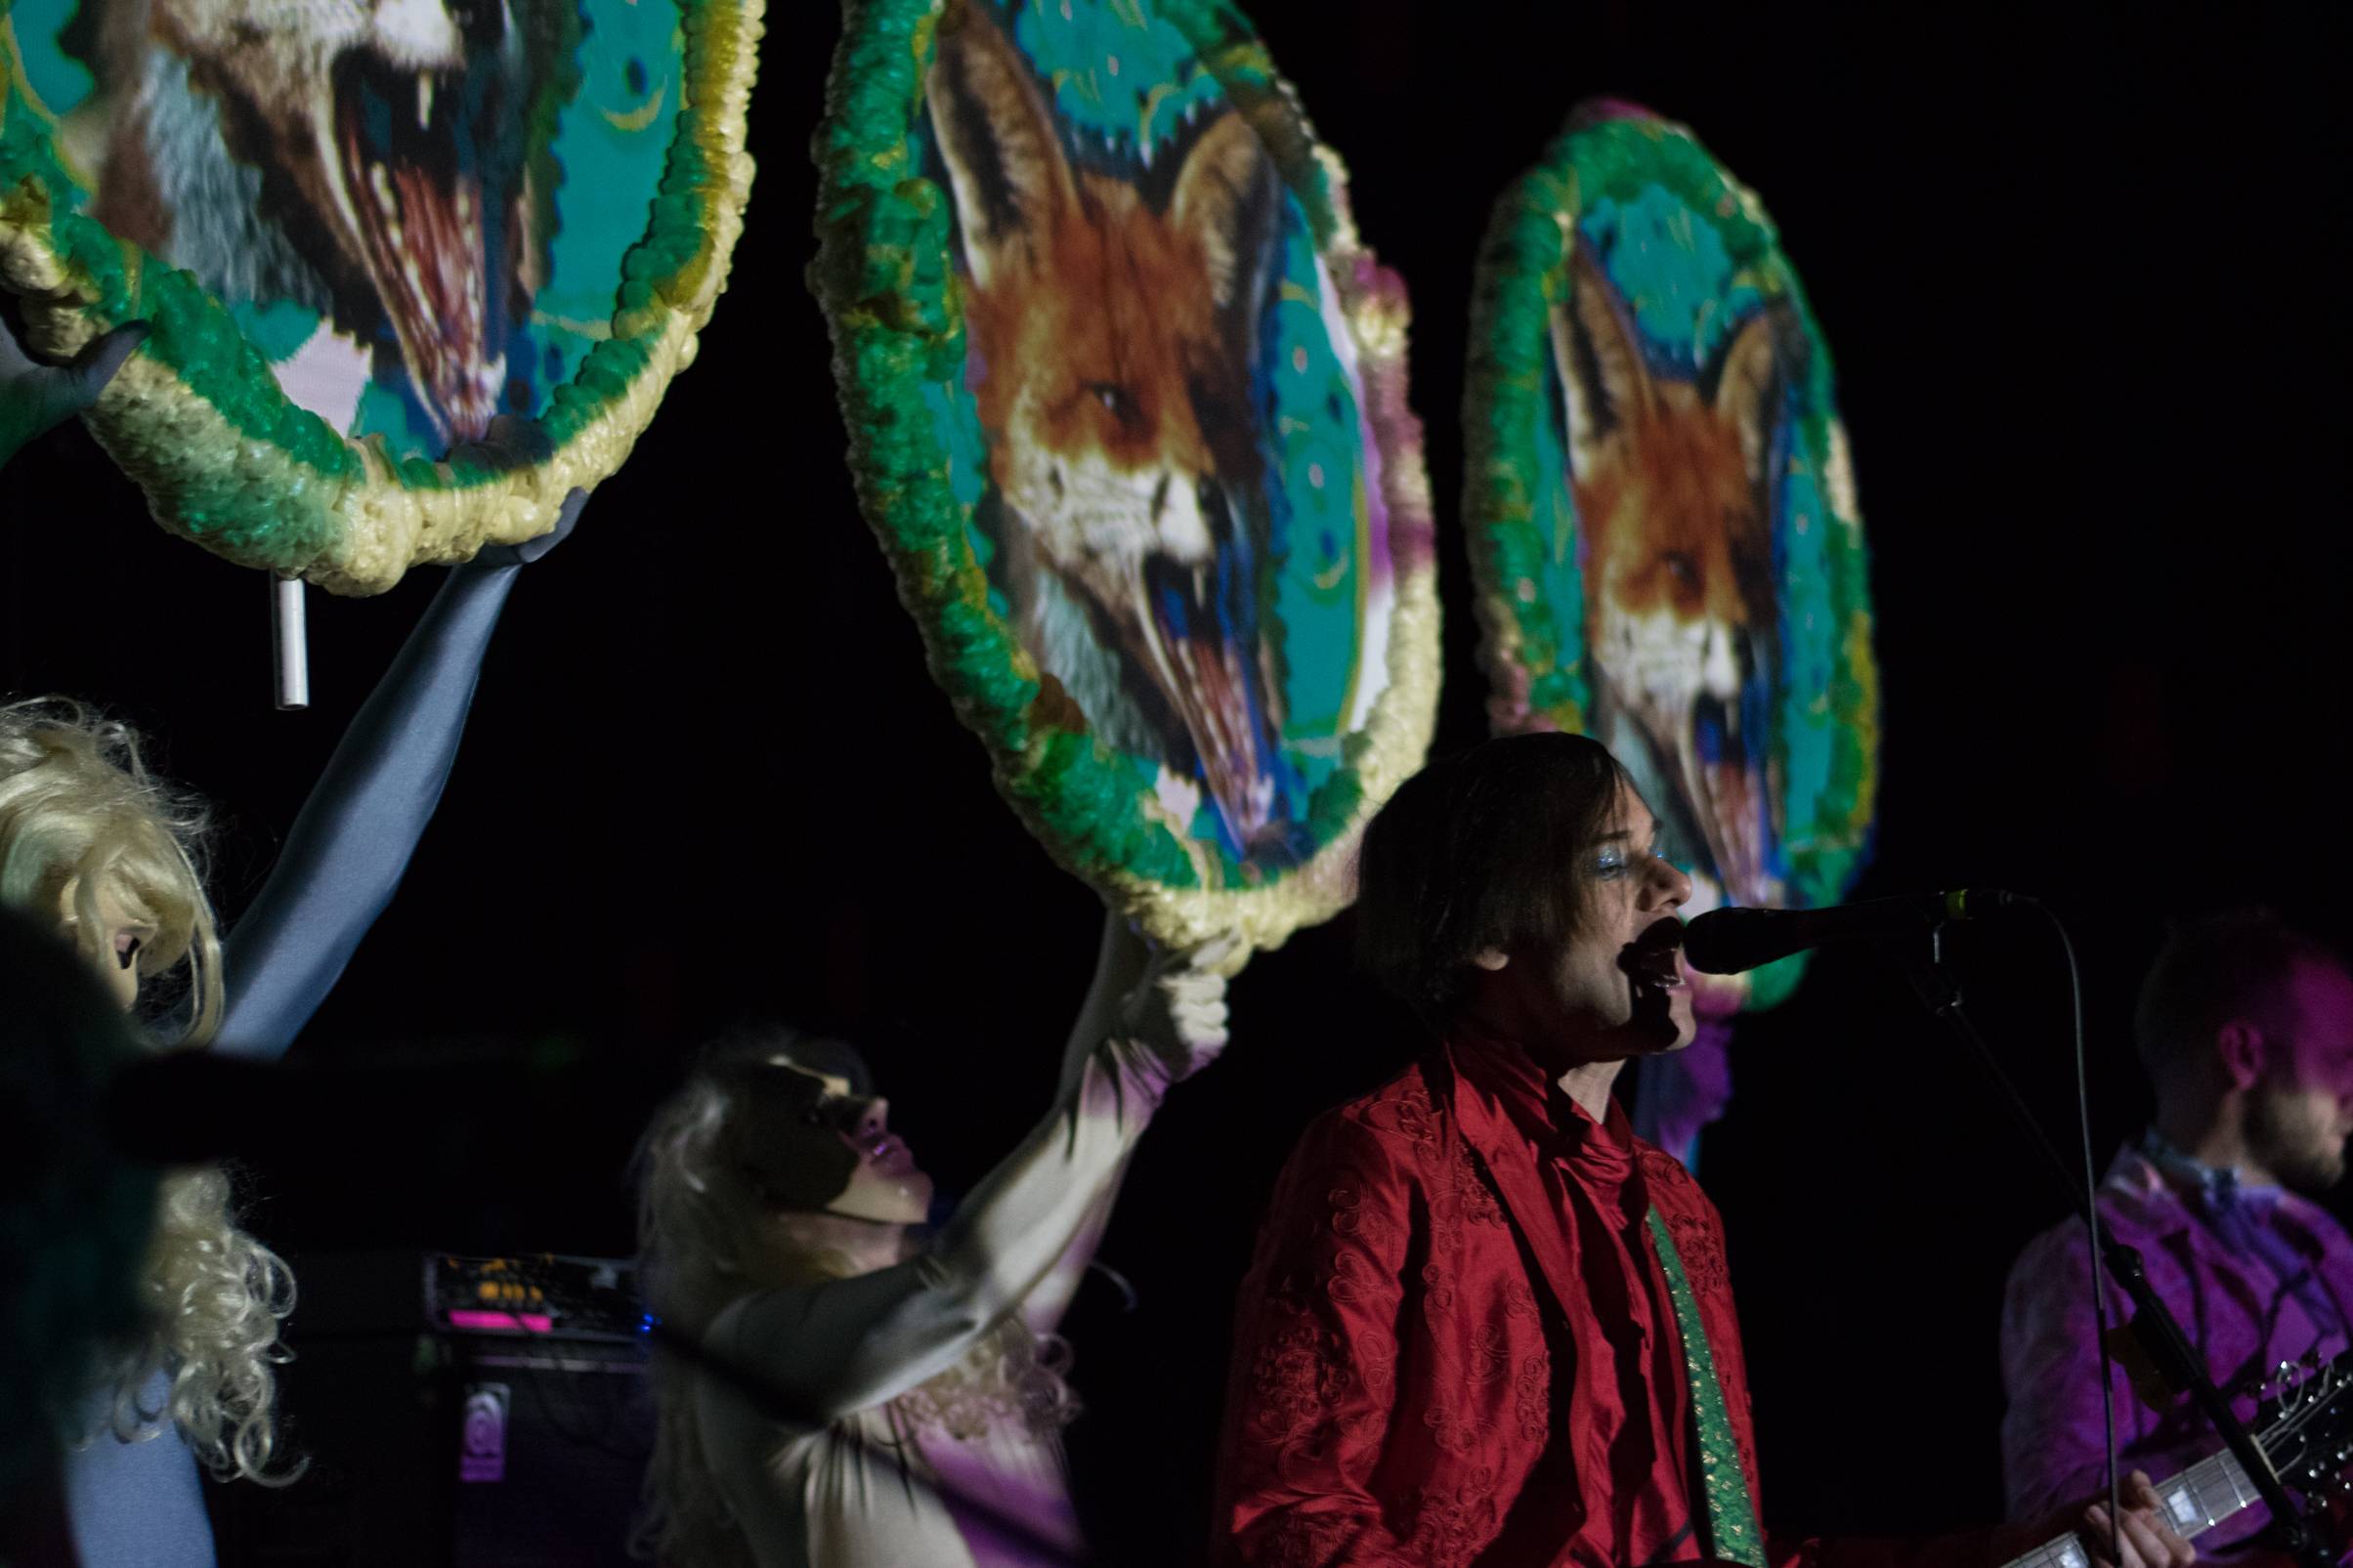 of Montreal’s special brand of awesome